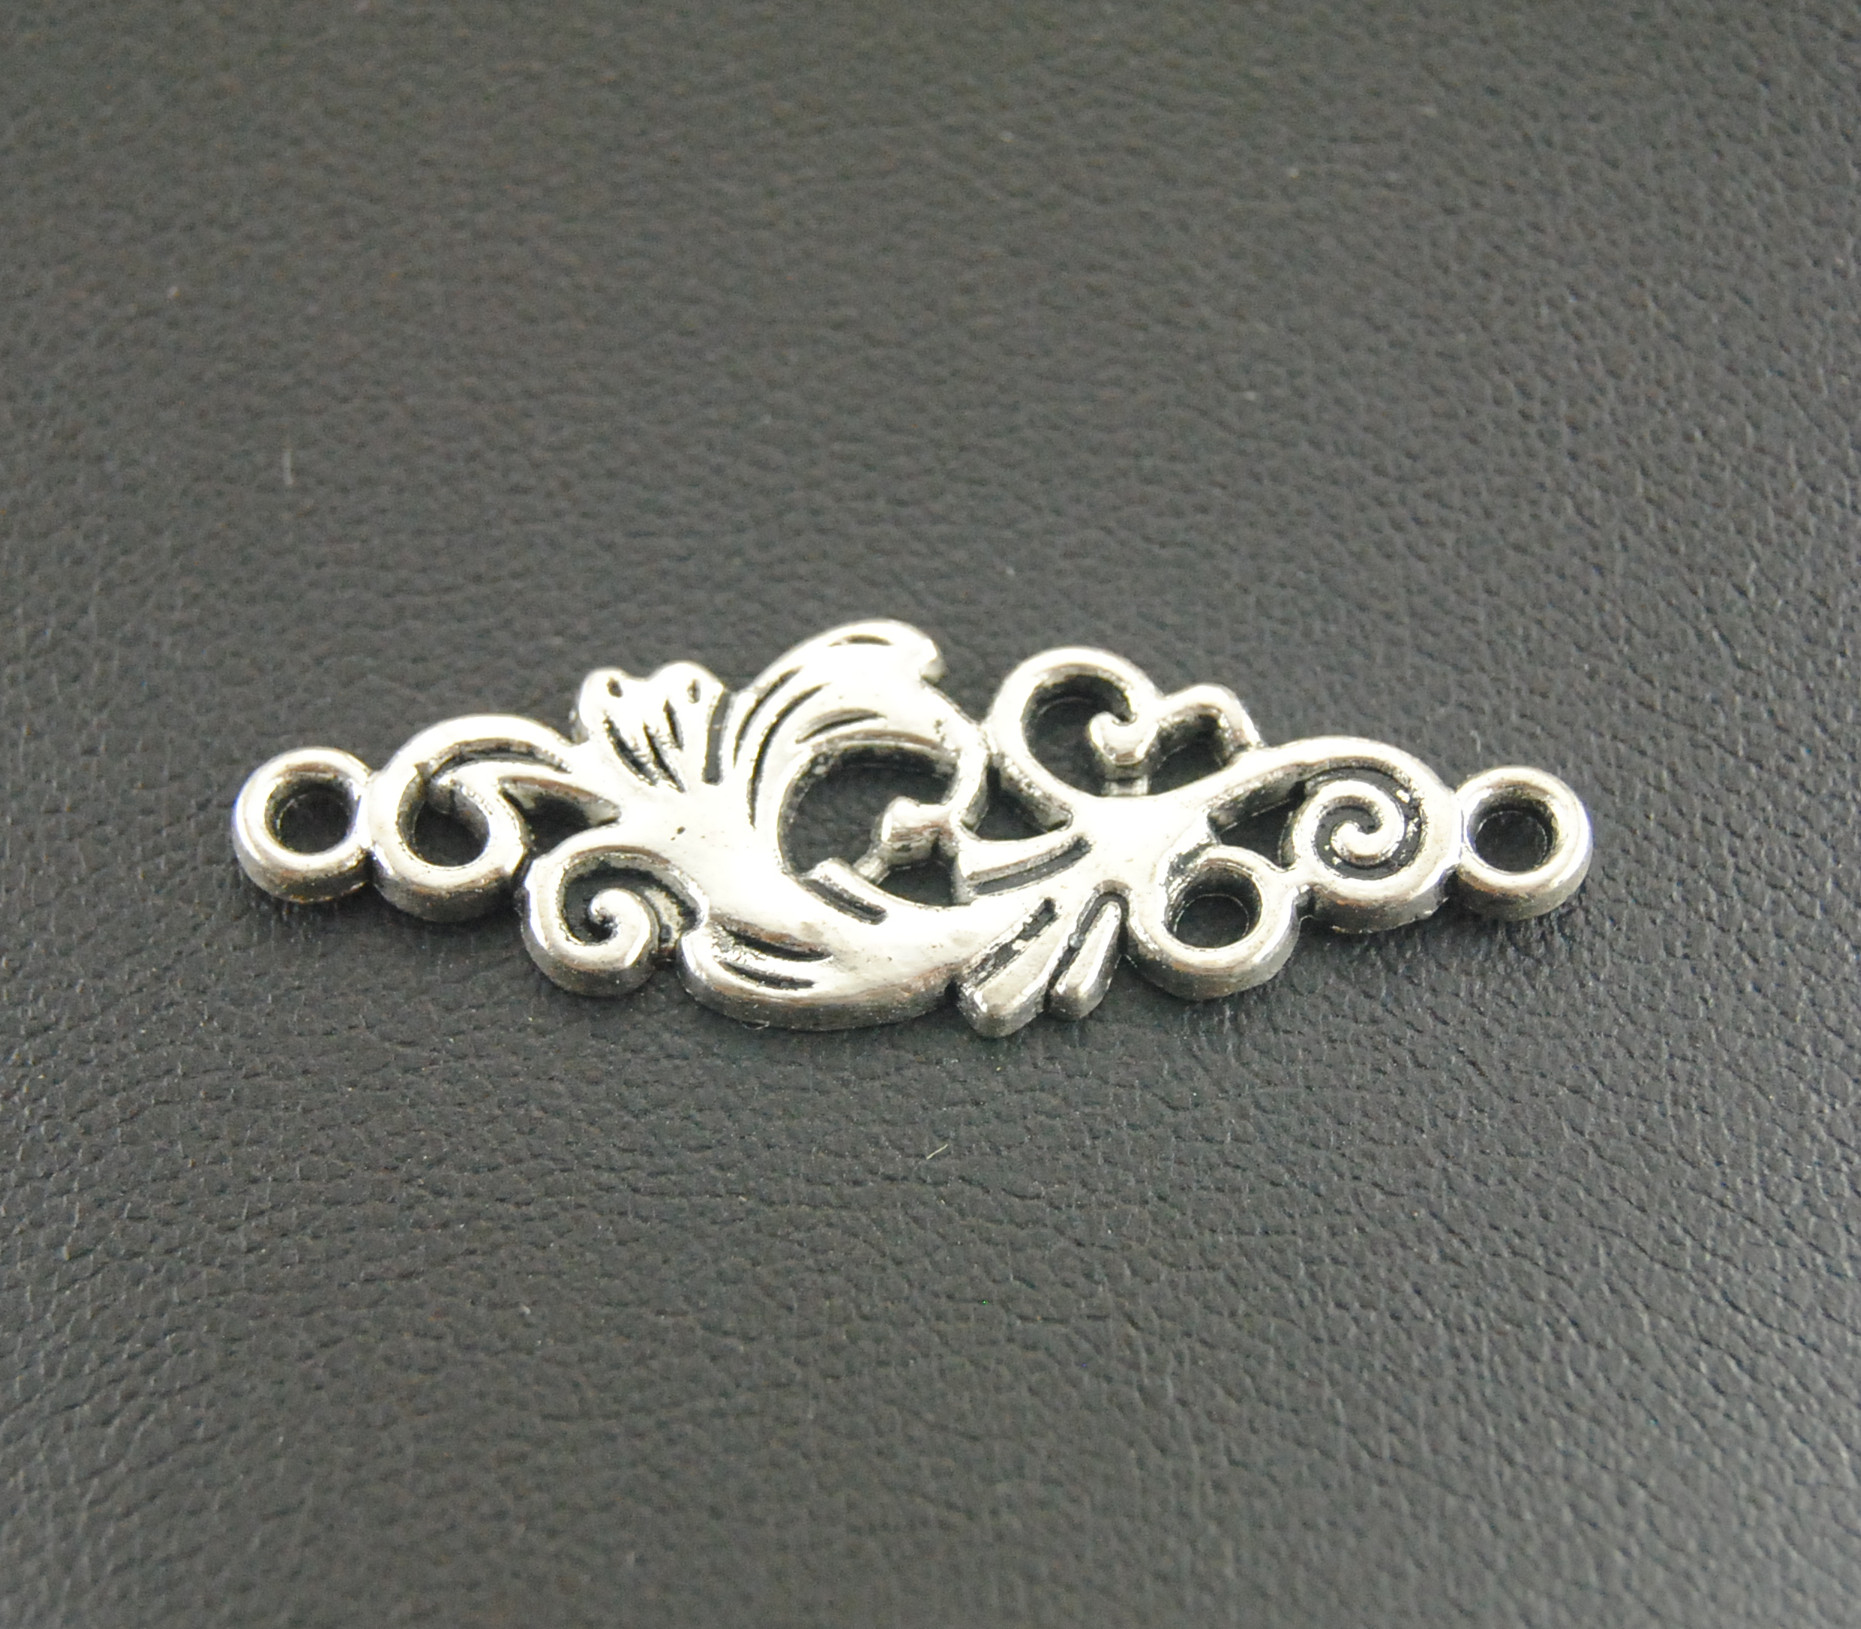 30 pcs Silver Color Flowers Connector Filigree DIY Metal Bracelet Necklace Jewelry Findings A293